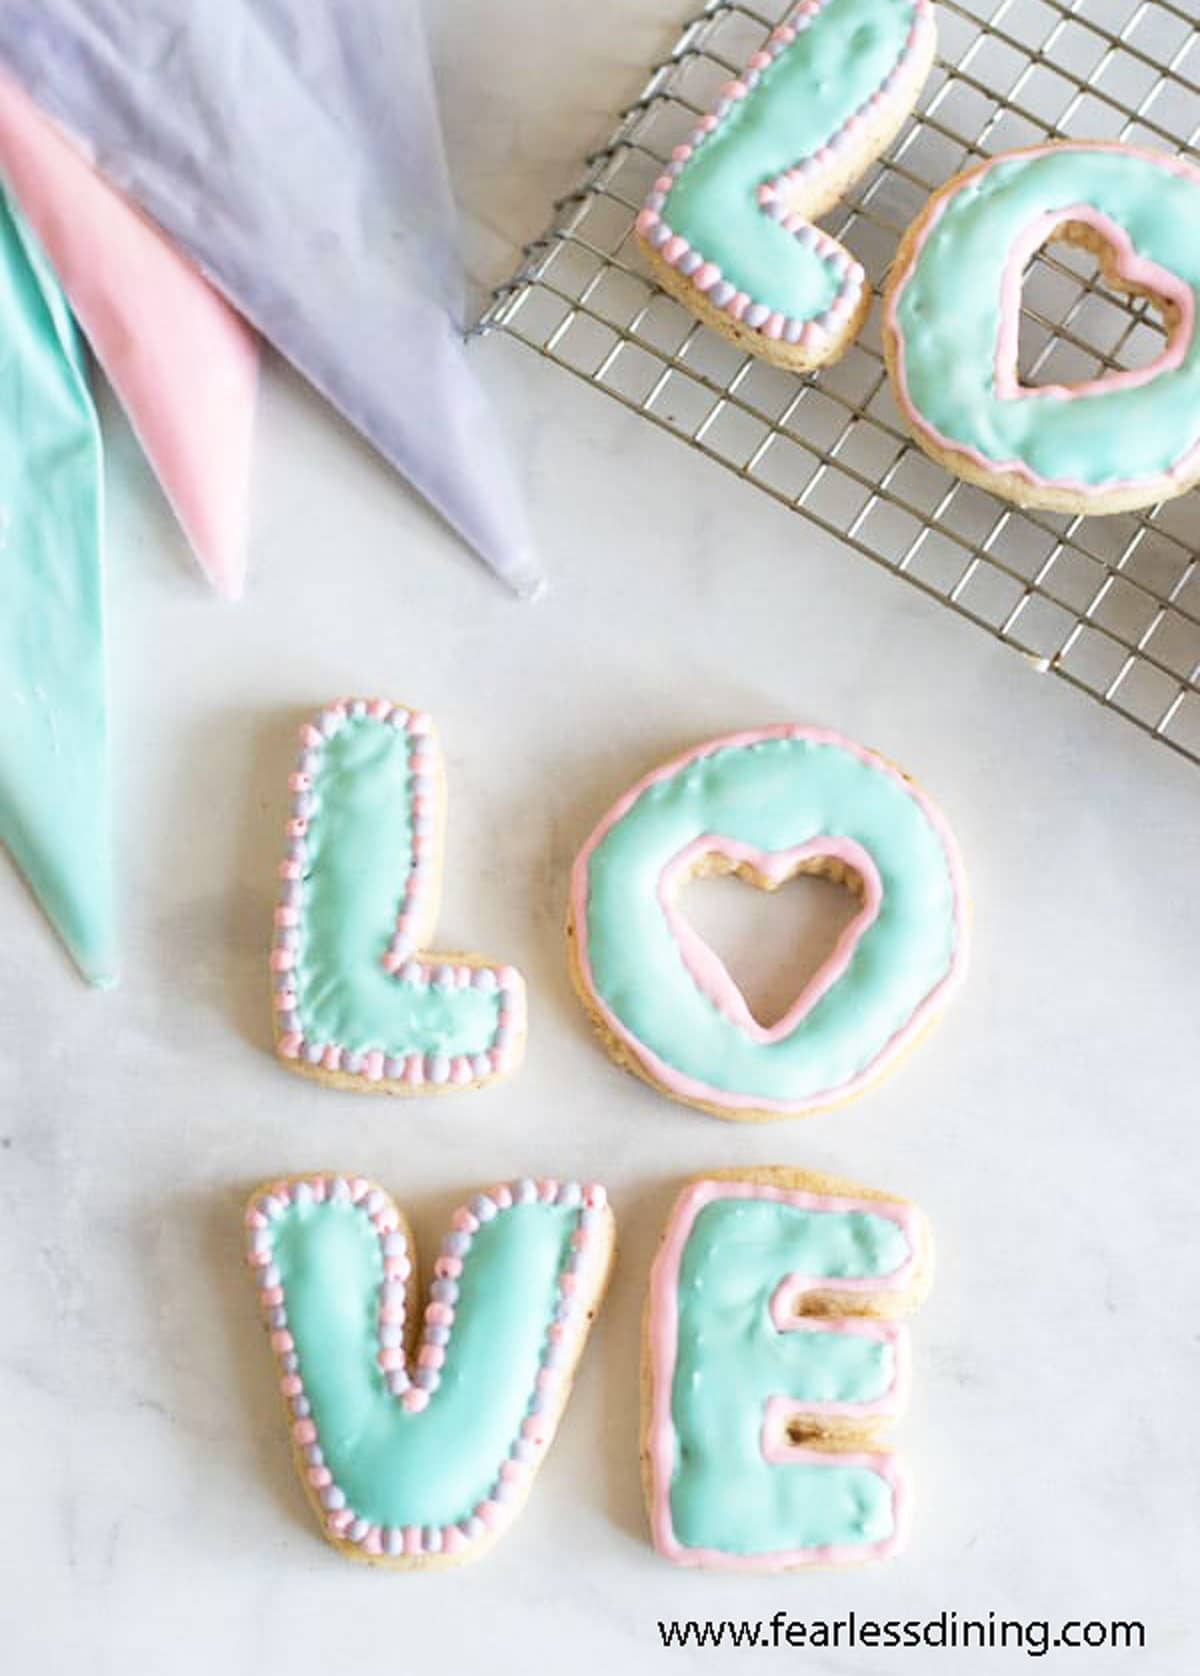 gluten free cut out cookies in letter shapes LOVE decorated 